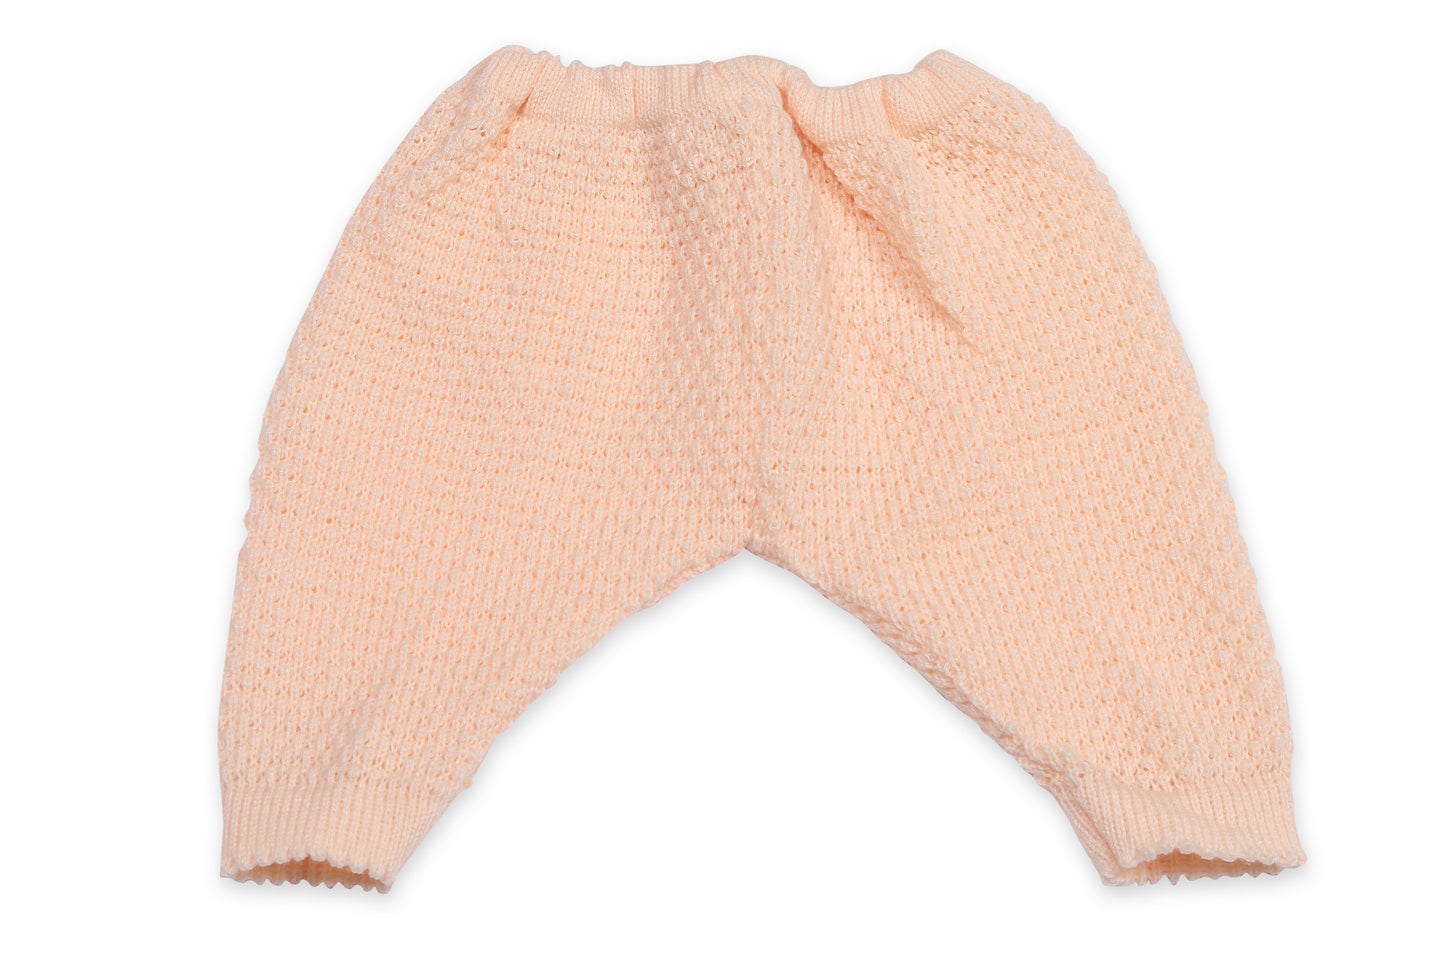 Baby Knitted Sweater, Leggings, Cap & Booties Full Suit (4 Pcs) Beige